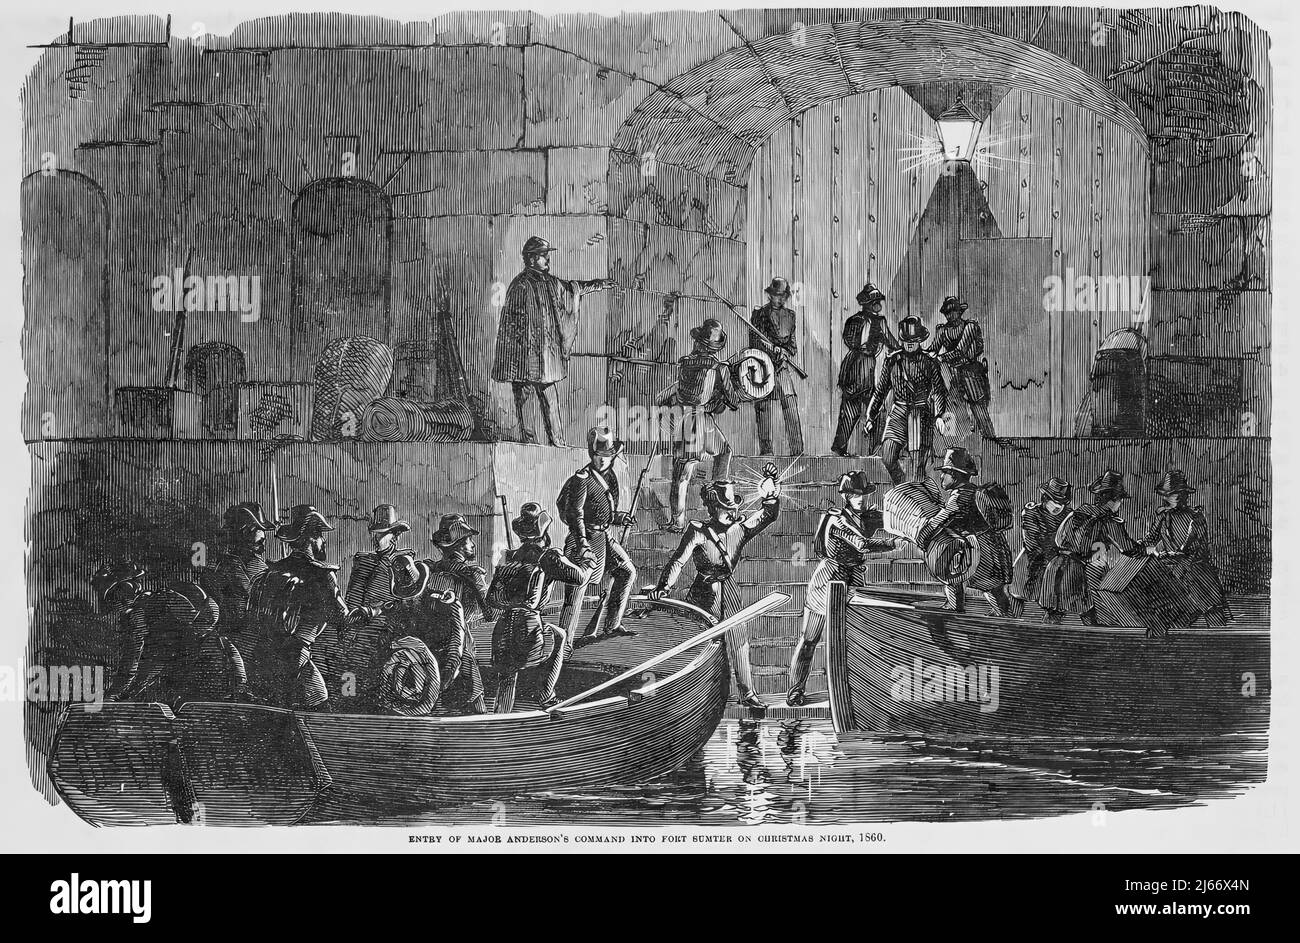 Entry of Major Robert Anderson's Command into Fort Sumter on Christmas Night, December 1860, in the American Civil War. 19th century illustration Stock Photo